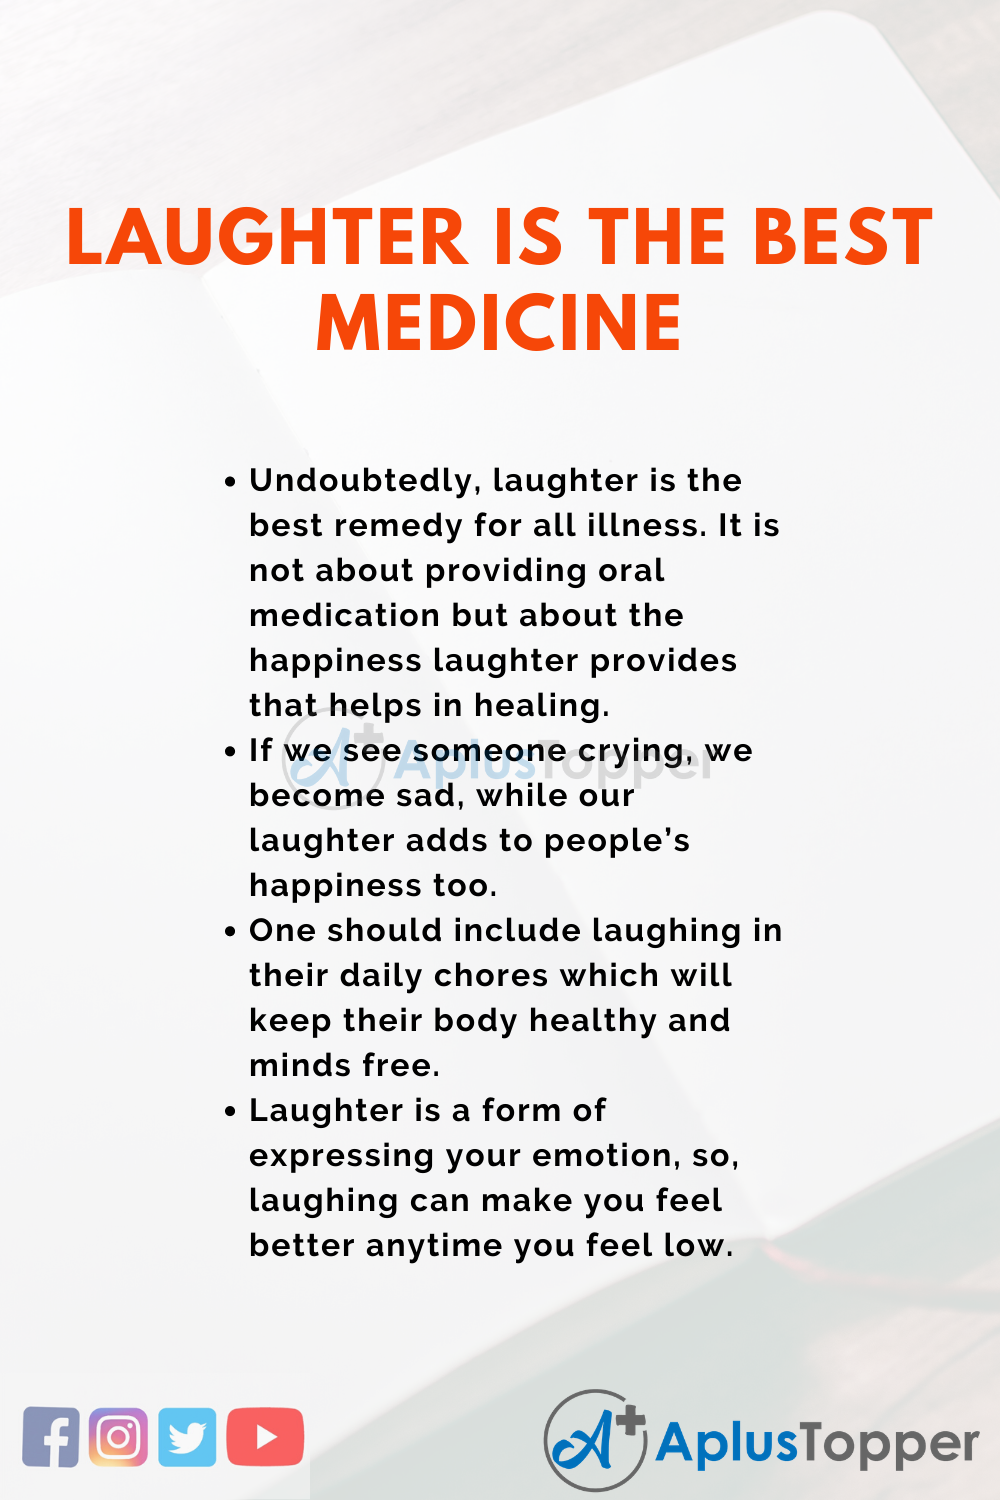 speech on topic laughter is the best medicine